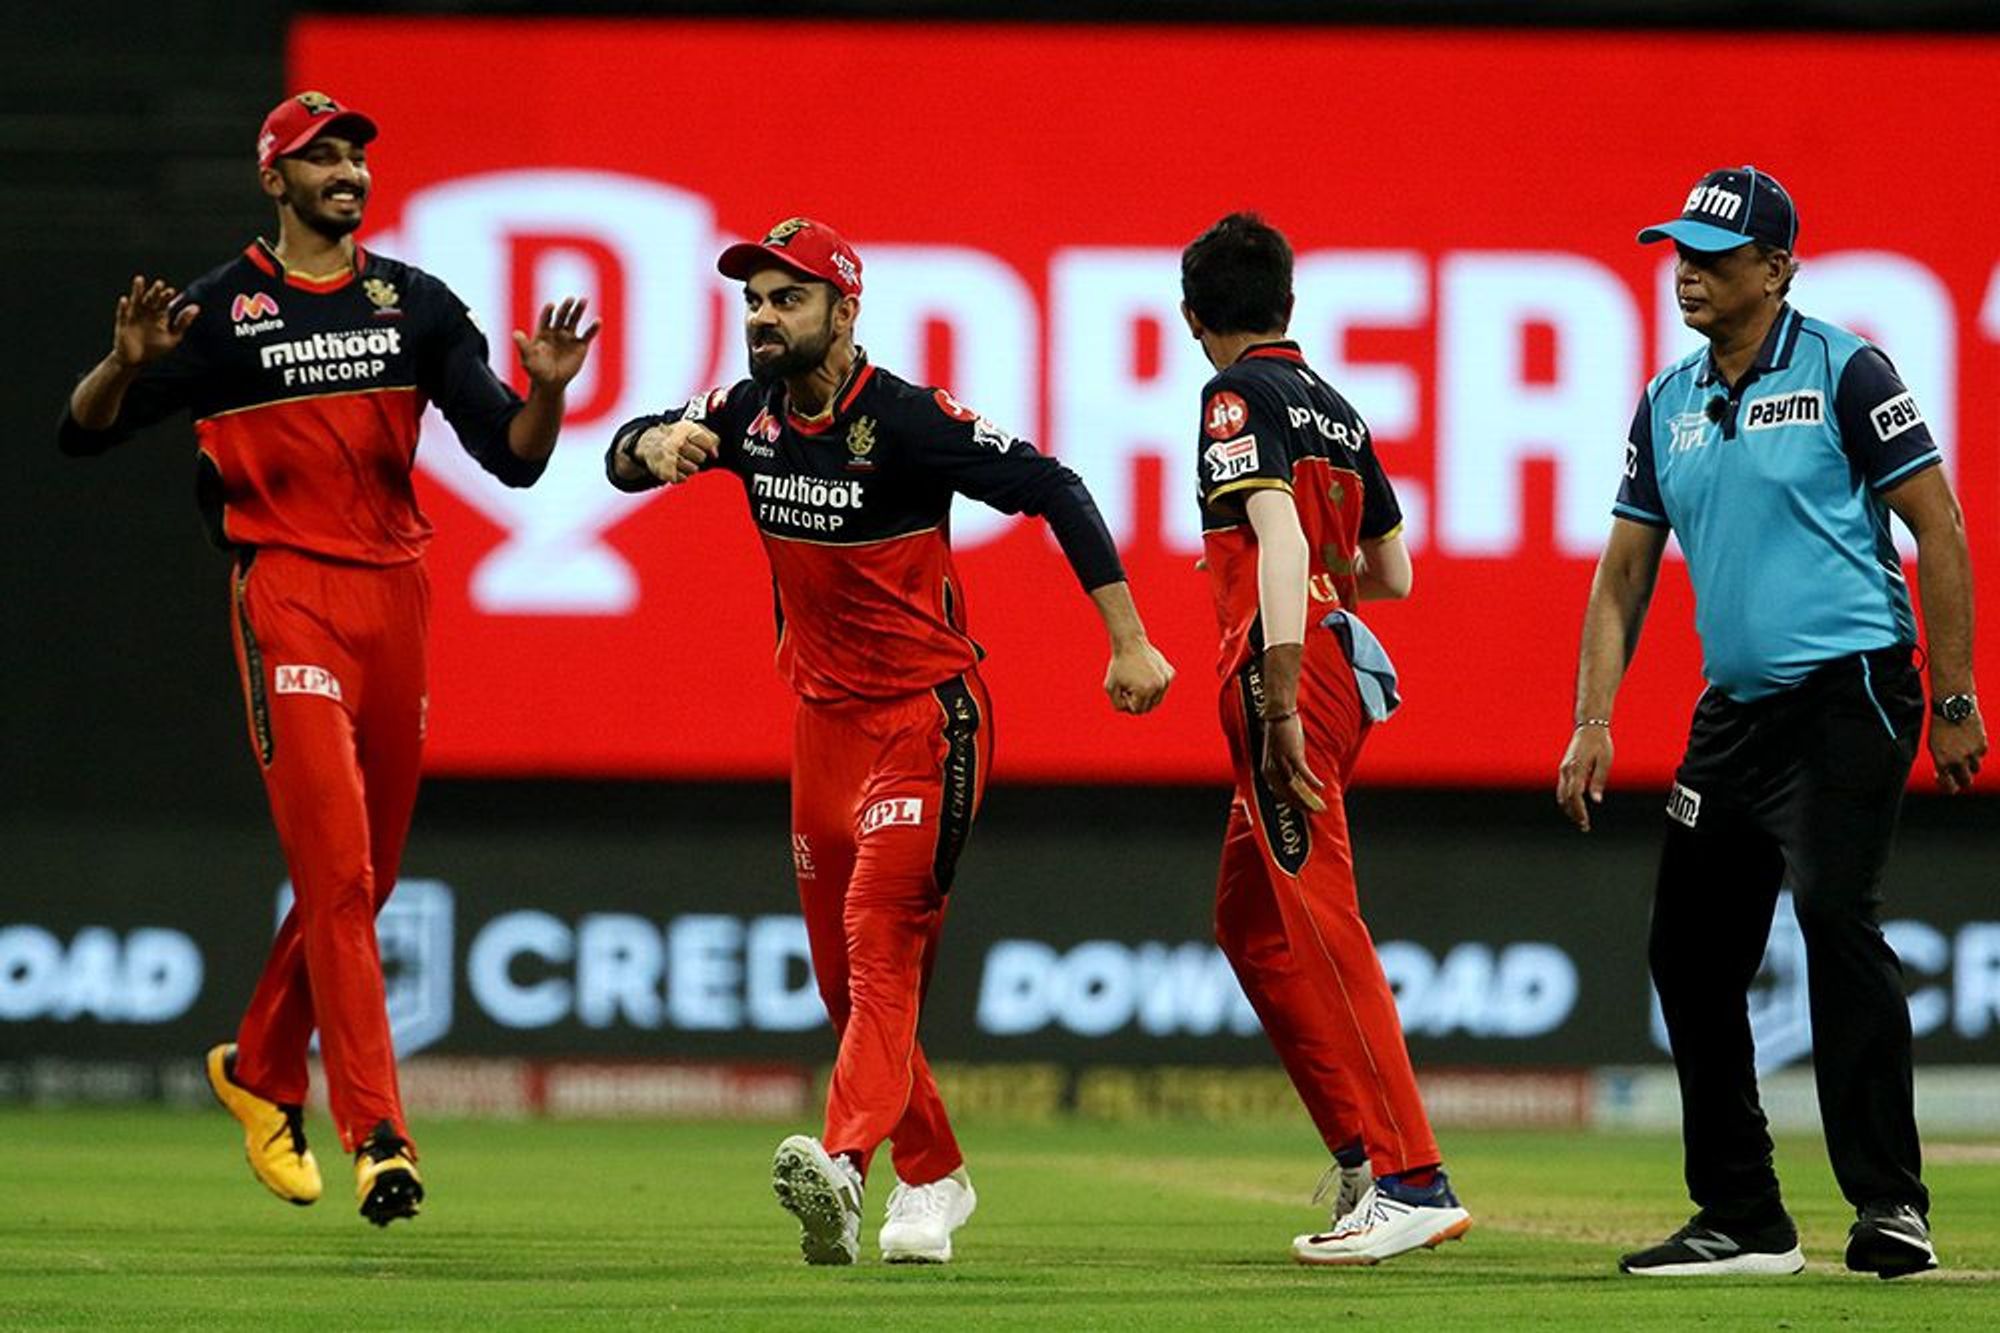 IPL 2020 We did really well to get back but lacked execution in second half, rues Virat Kohli